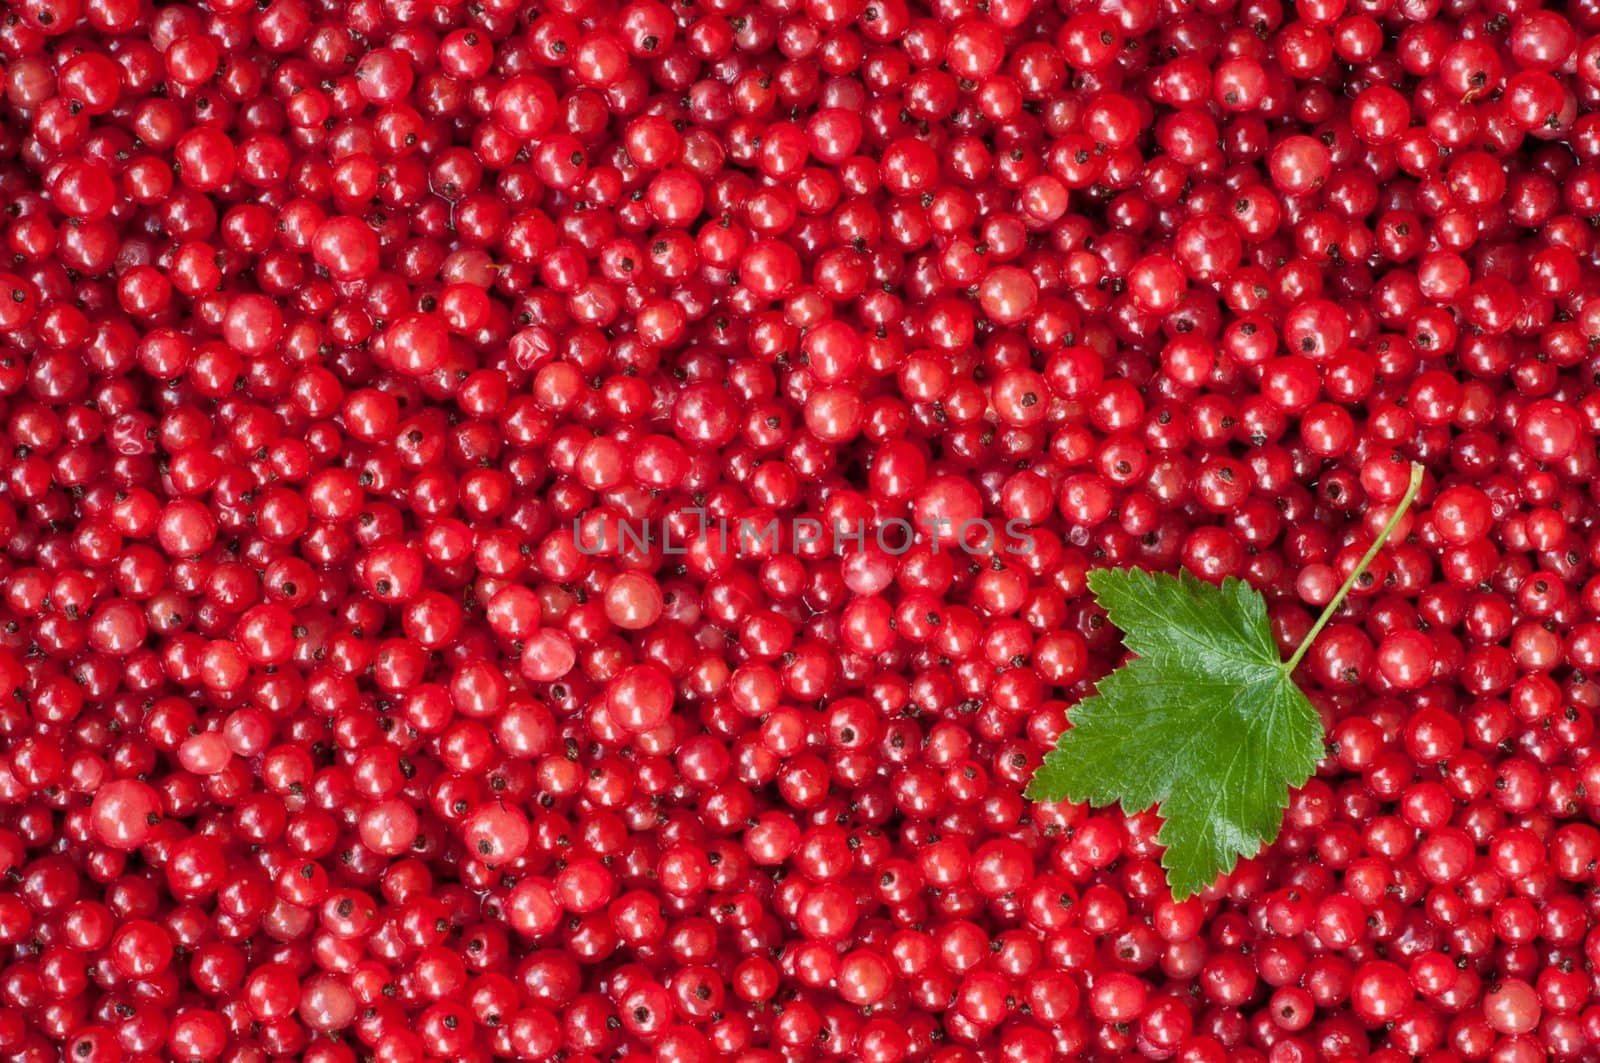 Berries of a red currant by alexcoolok